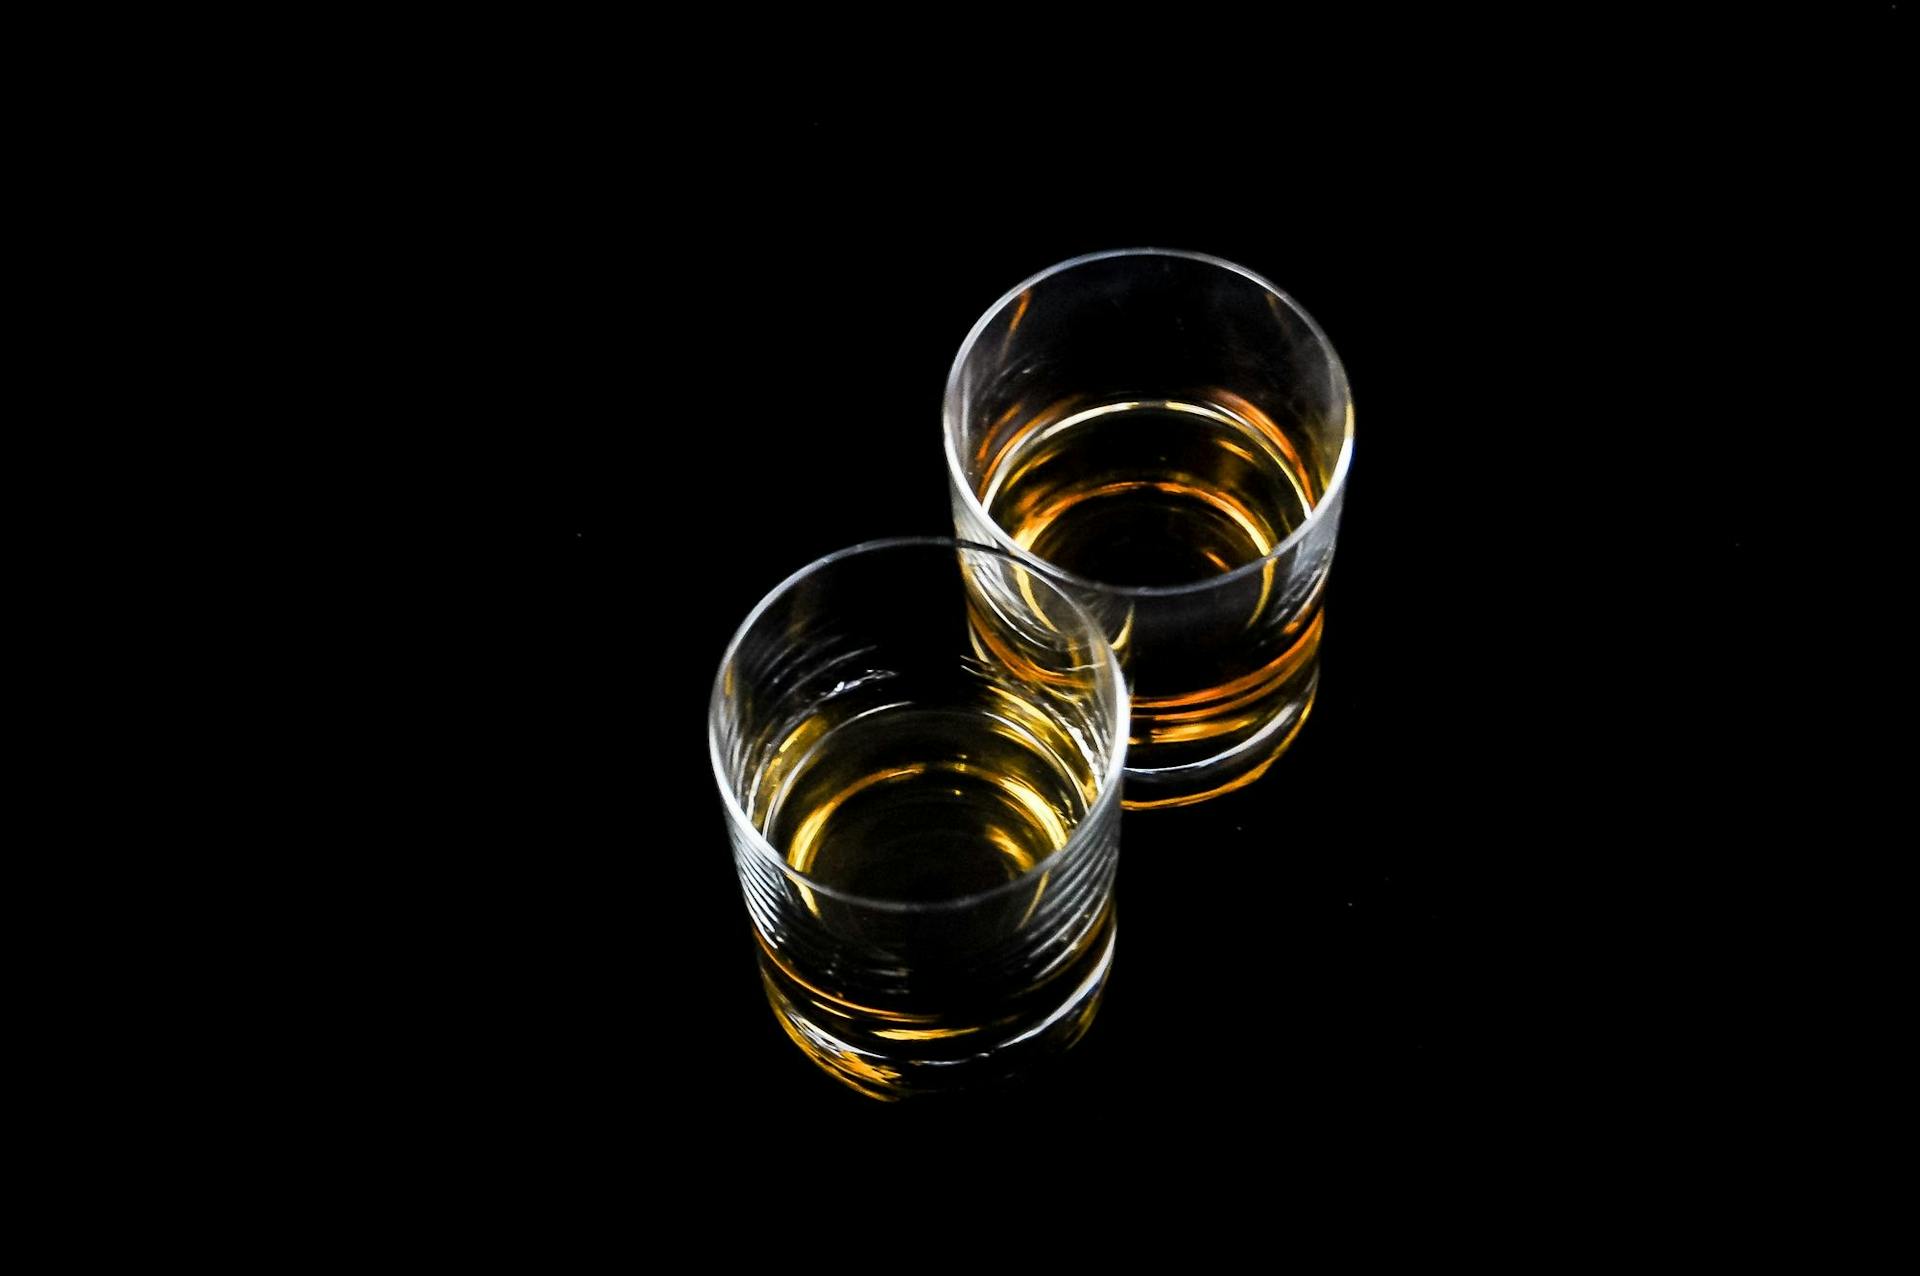 Two glasses of alcohol | Source: Pexels